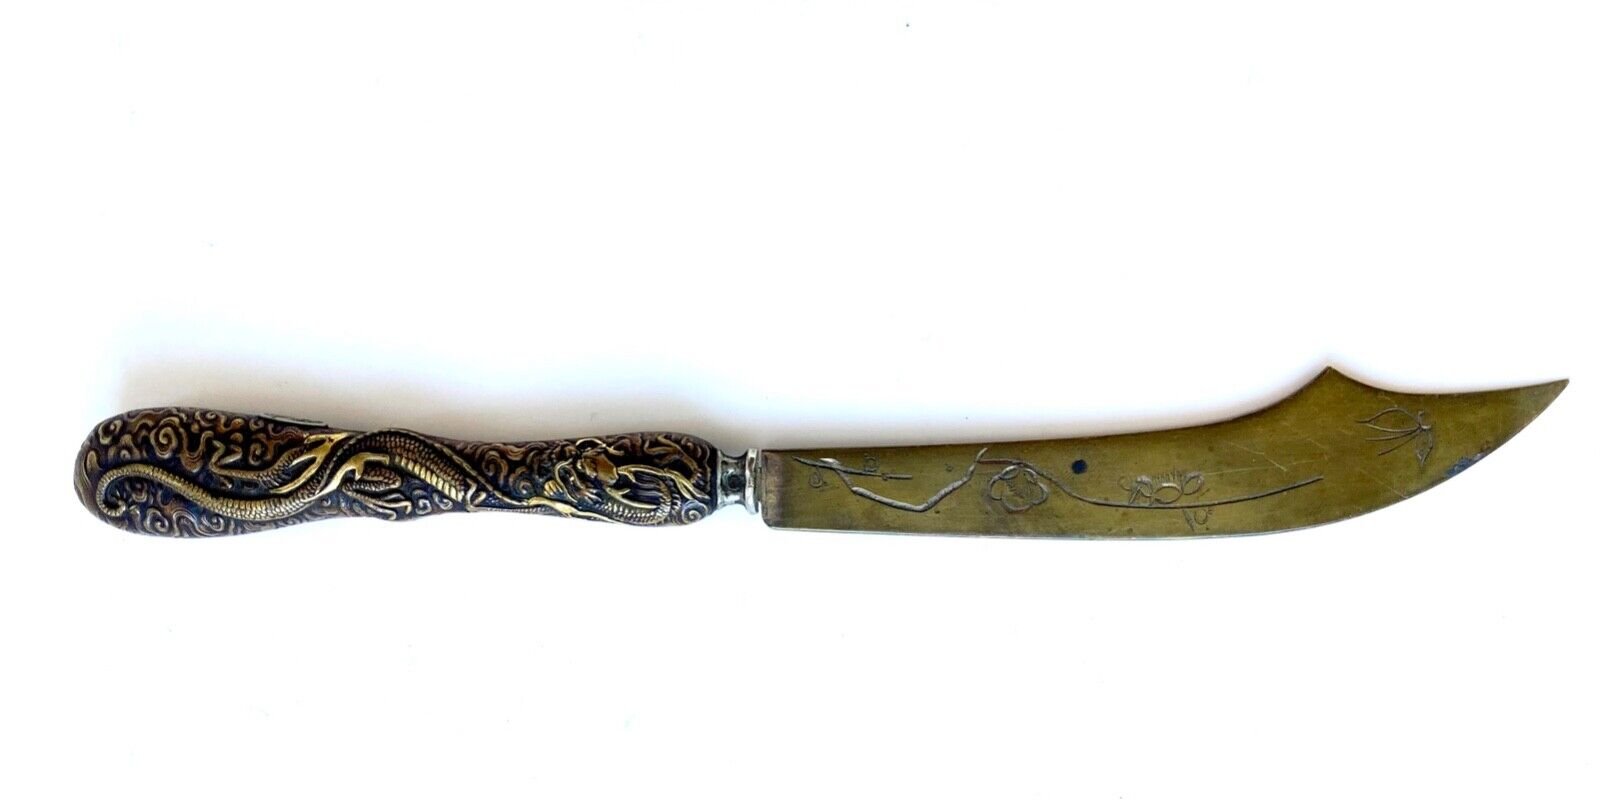 Antique Ornately Decorated Brass Letter Opener or Decorative Knife